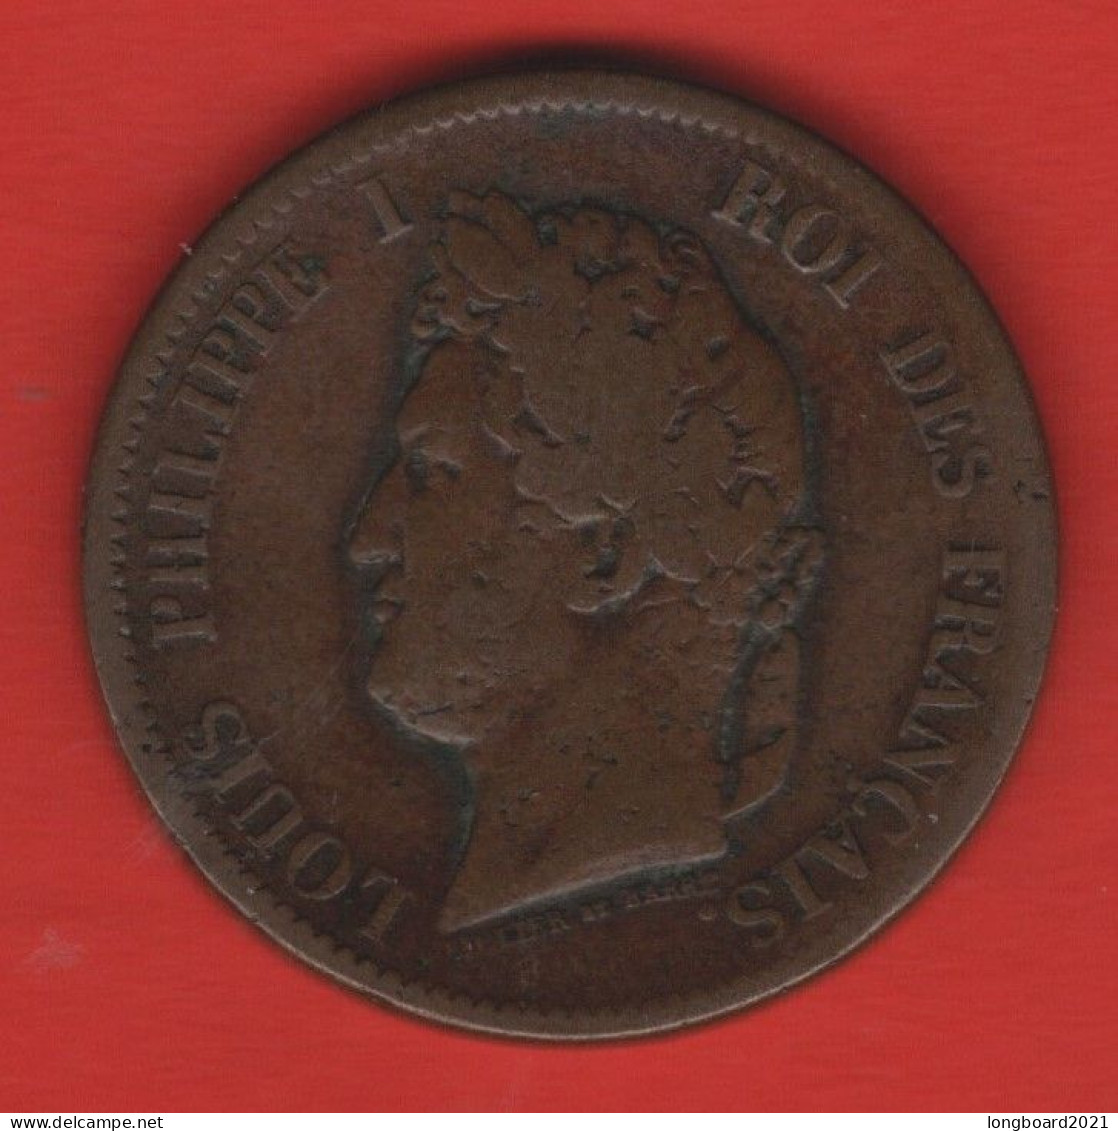 FRENCH COLONIES - 5 CENTIMES 1841A - French Colonies (1817-1844)